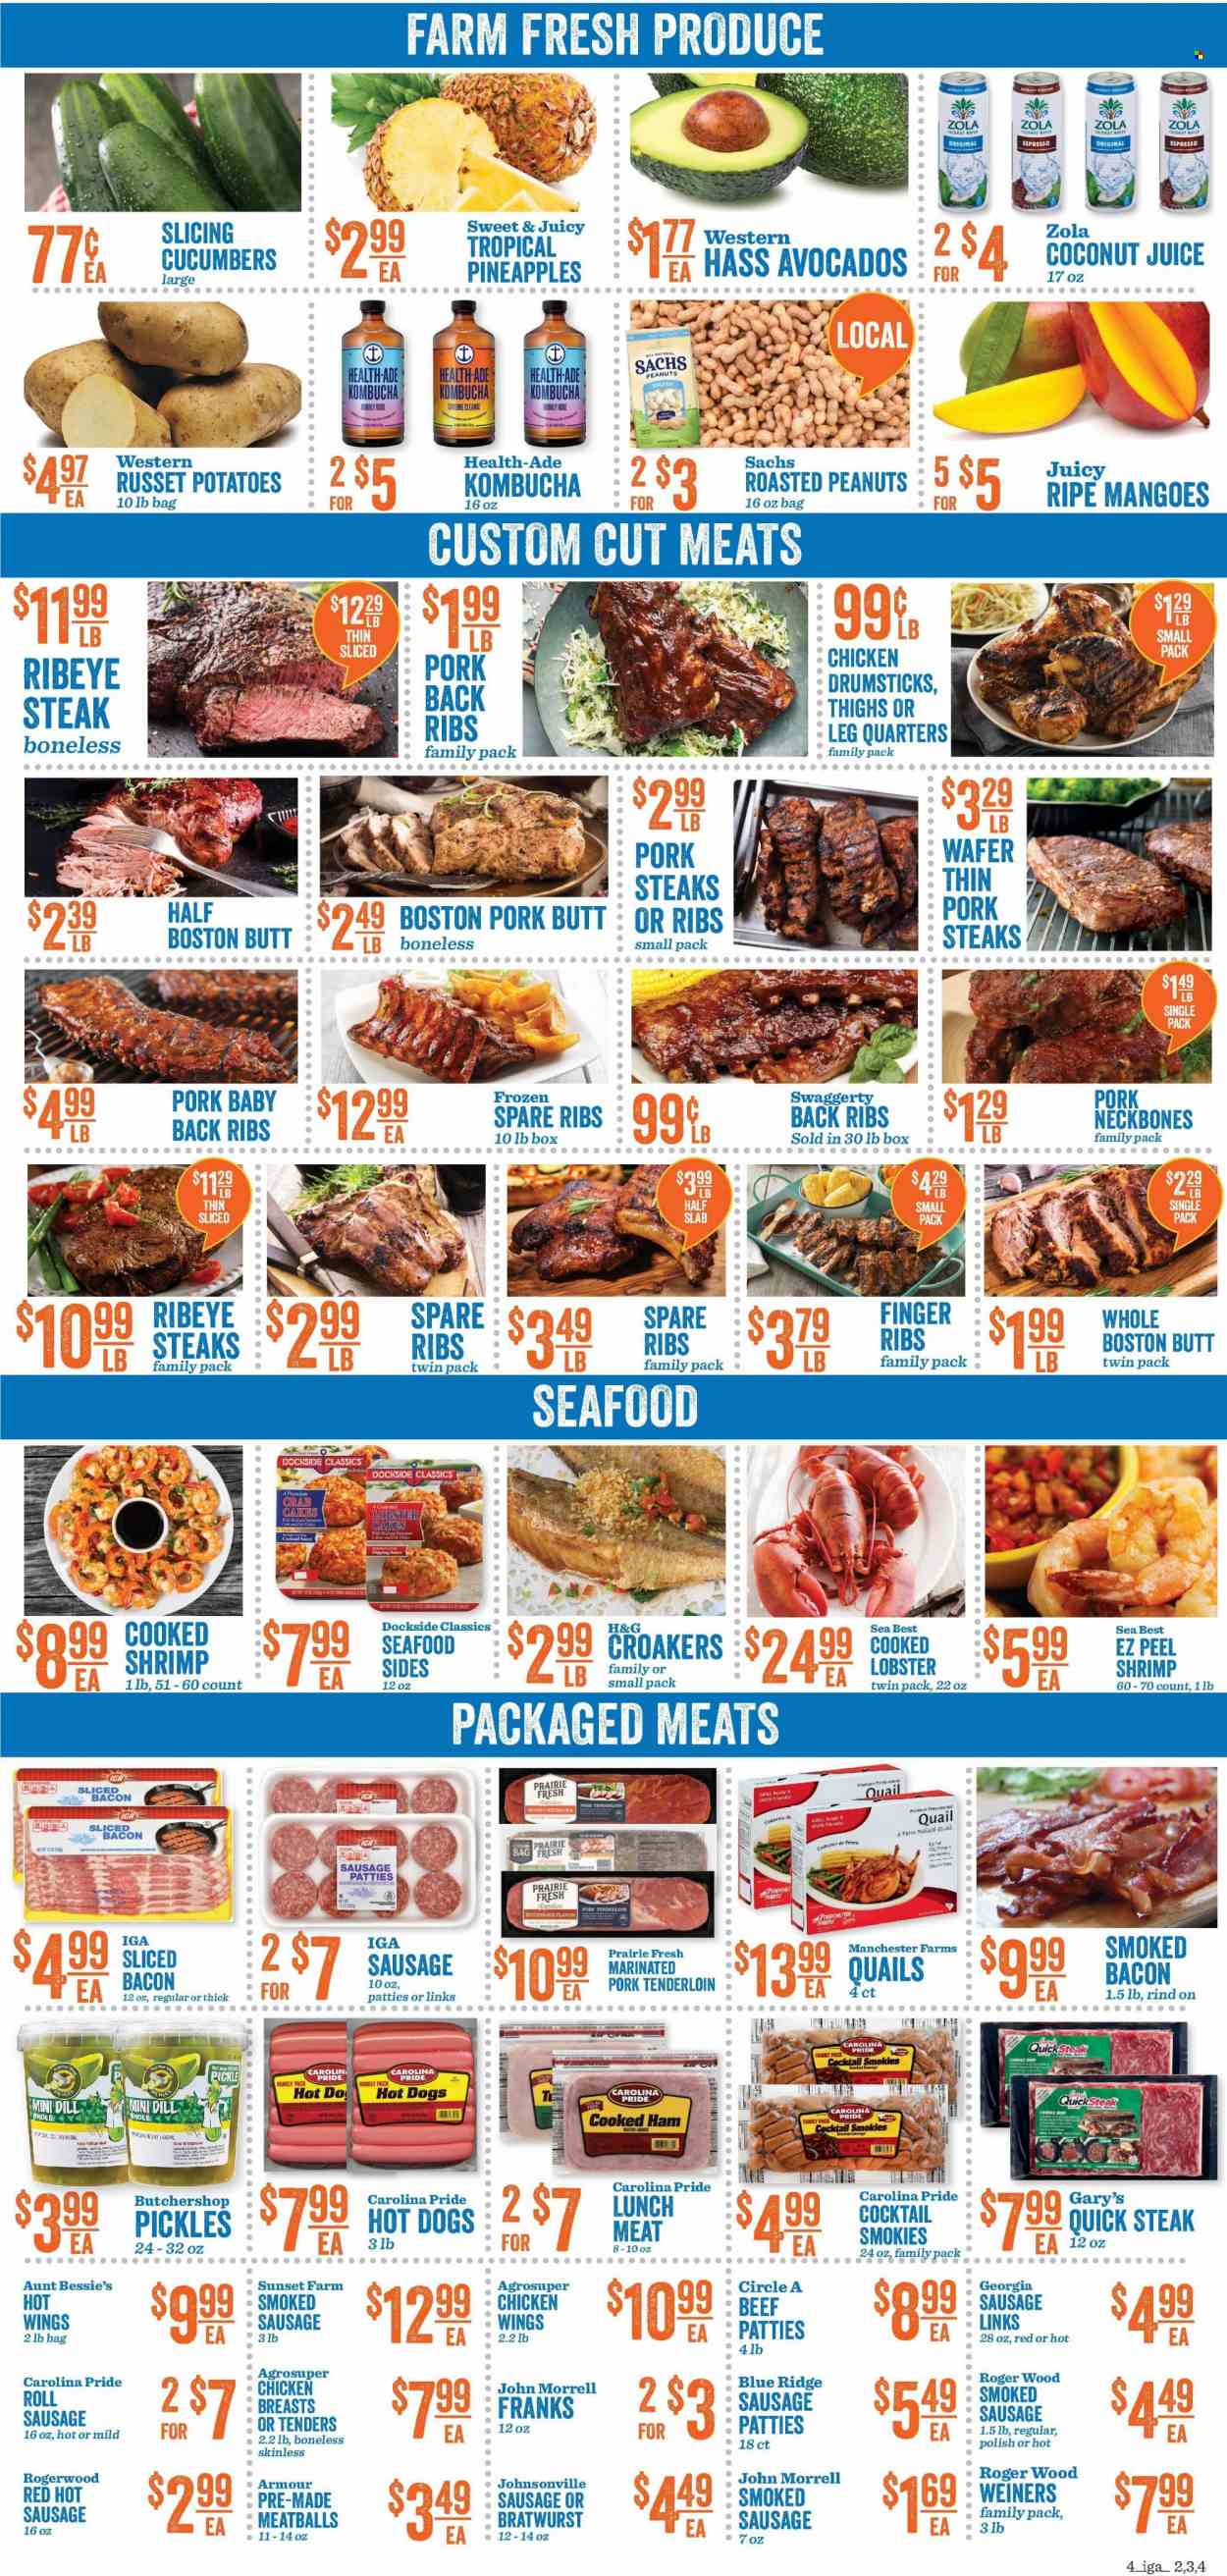 thumbnail - KJ´s Market Flyer - 05/25/2022 - 05/31/2022 - Sales products - Aunt Bessie's, cucumber, russet potatoes, potatoes, avocado, mango, pineapple, lobster, seafood, shrimps, crab cake, lobster cakes, hot dog, meatballs, sauce, cooked ham, ham, Johnsonville, bratwurst, sausage, smoked sausage, lunch meat, chicken wings, wafers, pickles, dill, sriracha, honey, roasted peanuts, peanuts, juice, coconut water, kombucha, rosé wine, quail, chicken breasts, chicken drumsticks, beef meat, beef steak, steak, ribeye steak, pork chops, pork meat, pork ribs, pork tenderloin, pork spare ribs, pork back ribs, marinated pork, polish, grill, rose. Page 4.